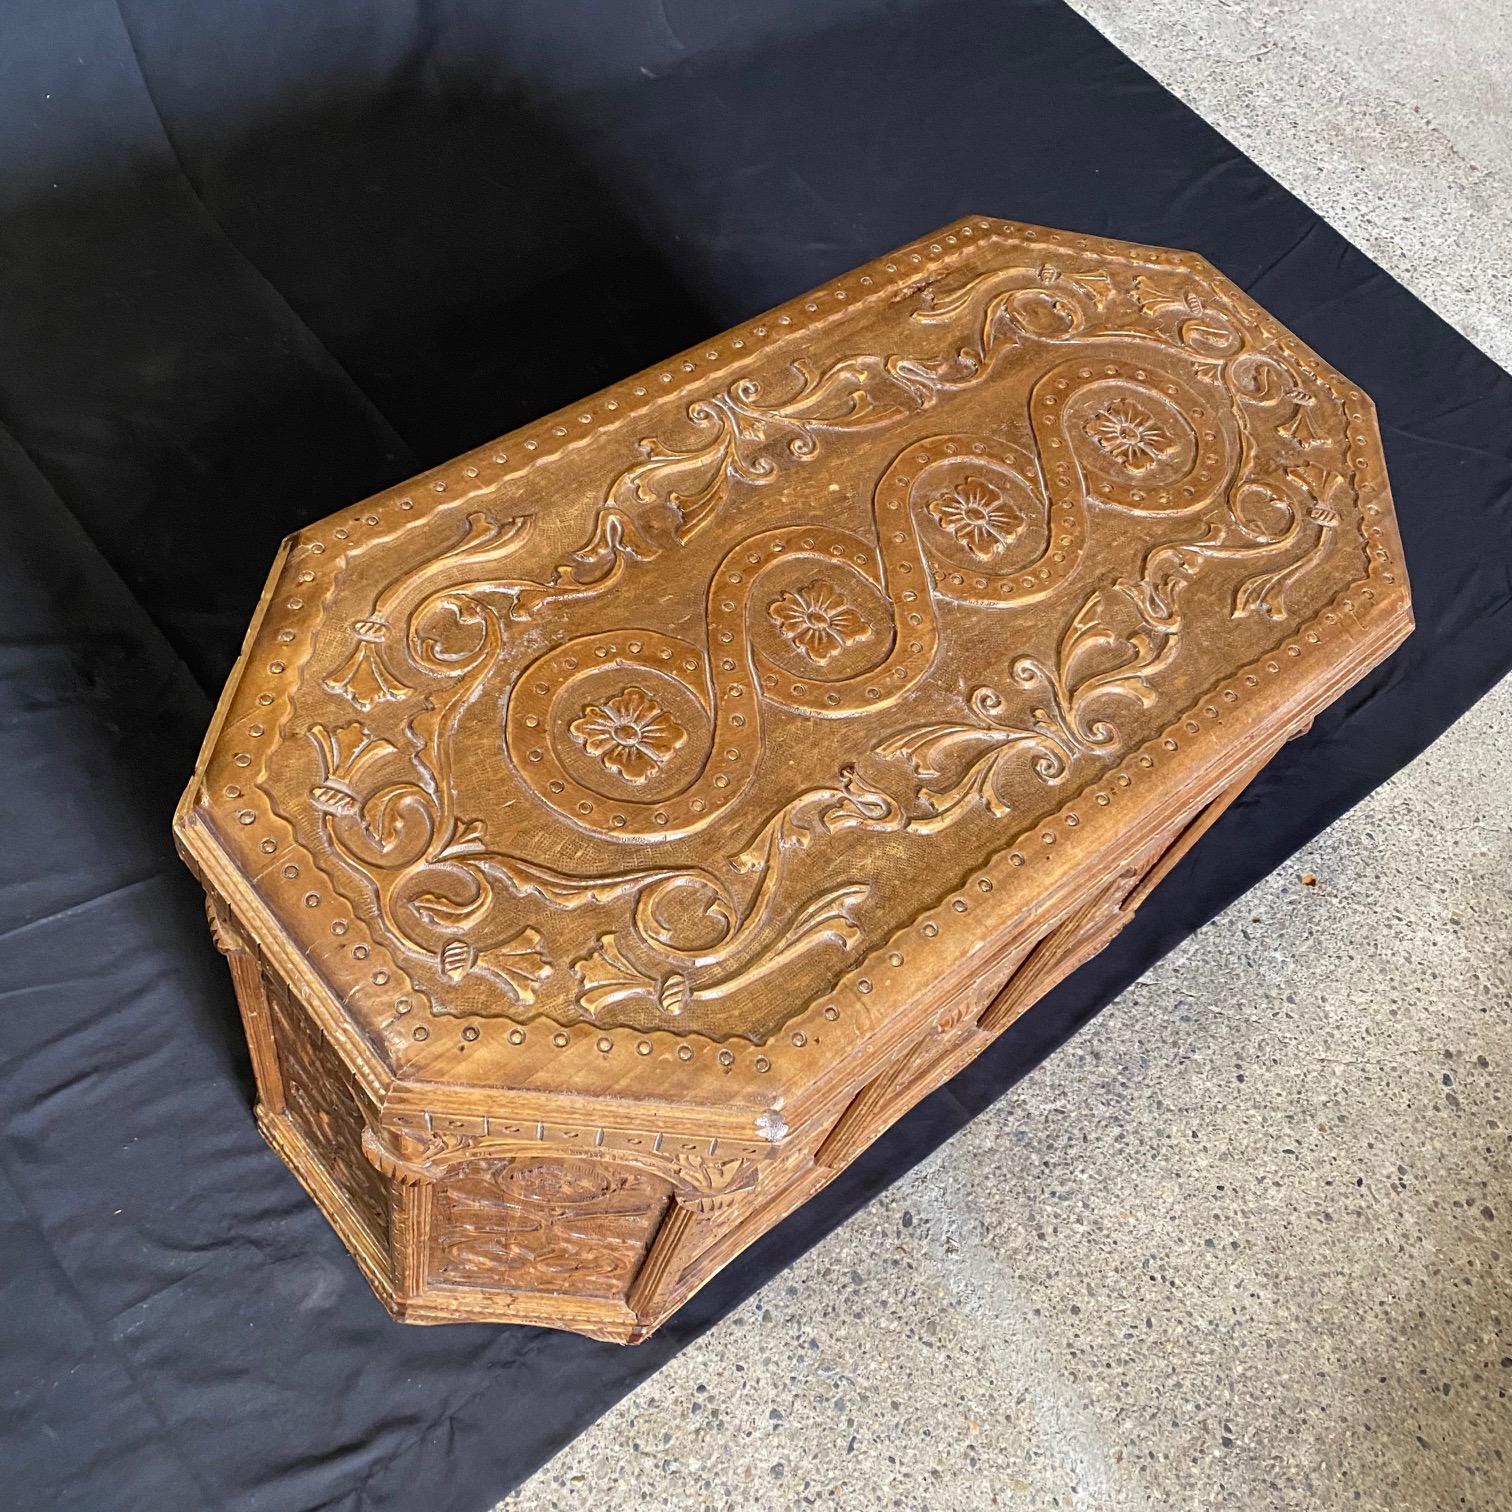 Antique European, likely Italian, sarcophagus shaped coffer, trunk or blanket chest that would also make a stunning coffee table. Could also be wonderful for lining storage in a bedroom at the foot of a bed. A wonderfully hand carved “coffer”, “mule